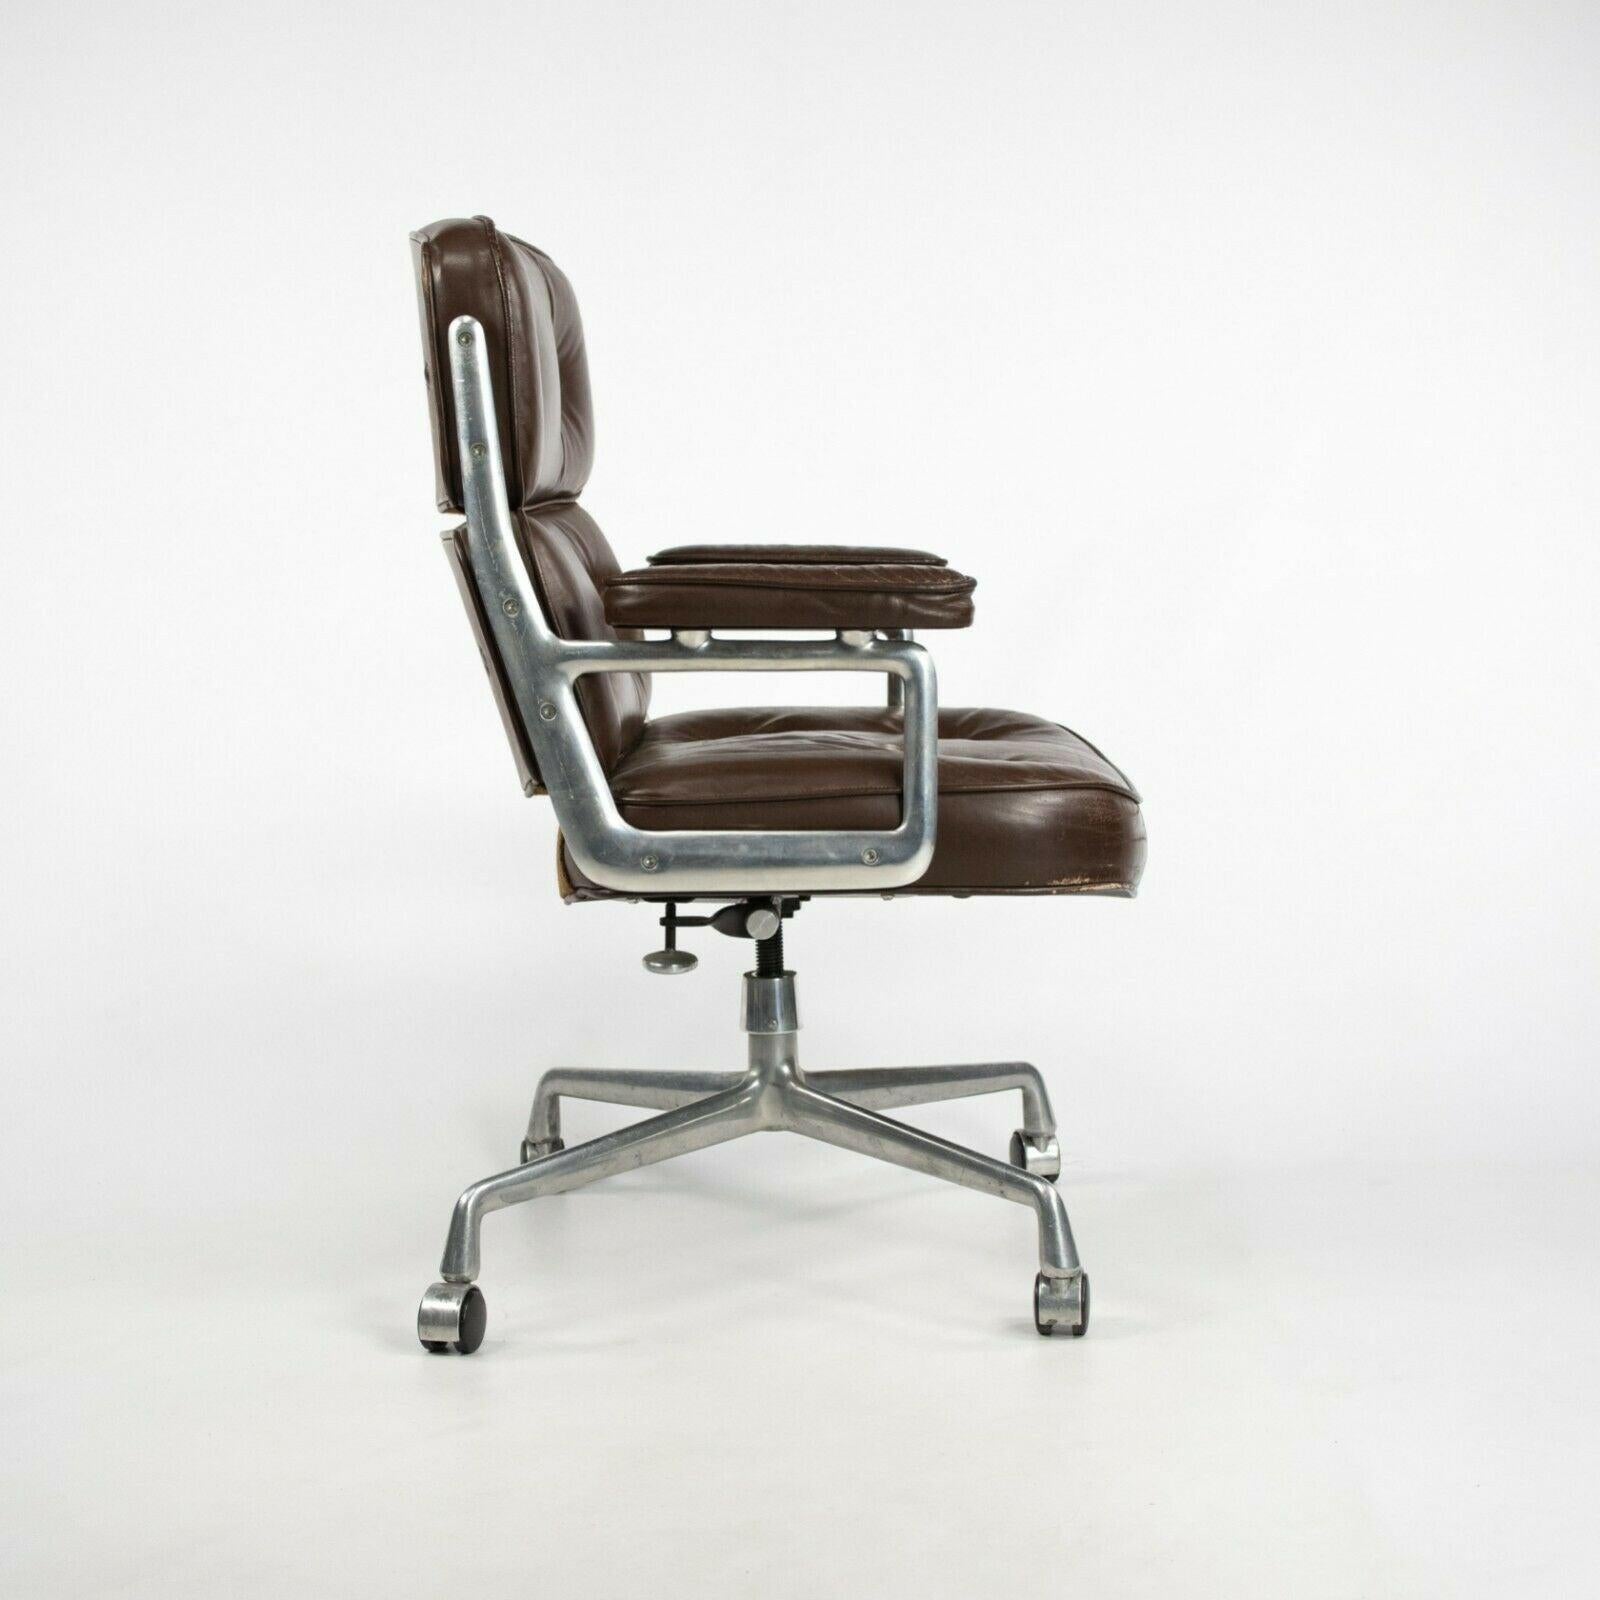 Late 20th Century 1989 Herman Miller Eames Time Life Executive Desk Chair in Brown Leather